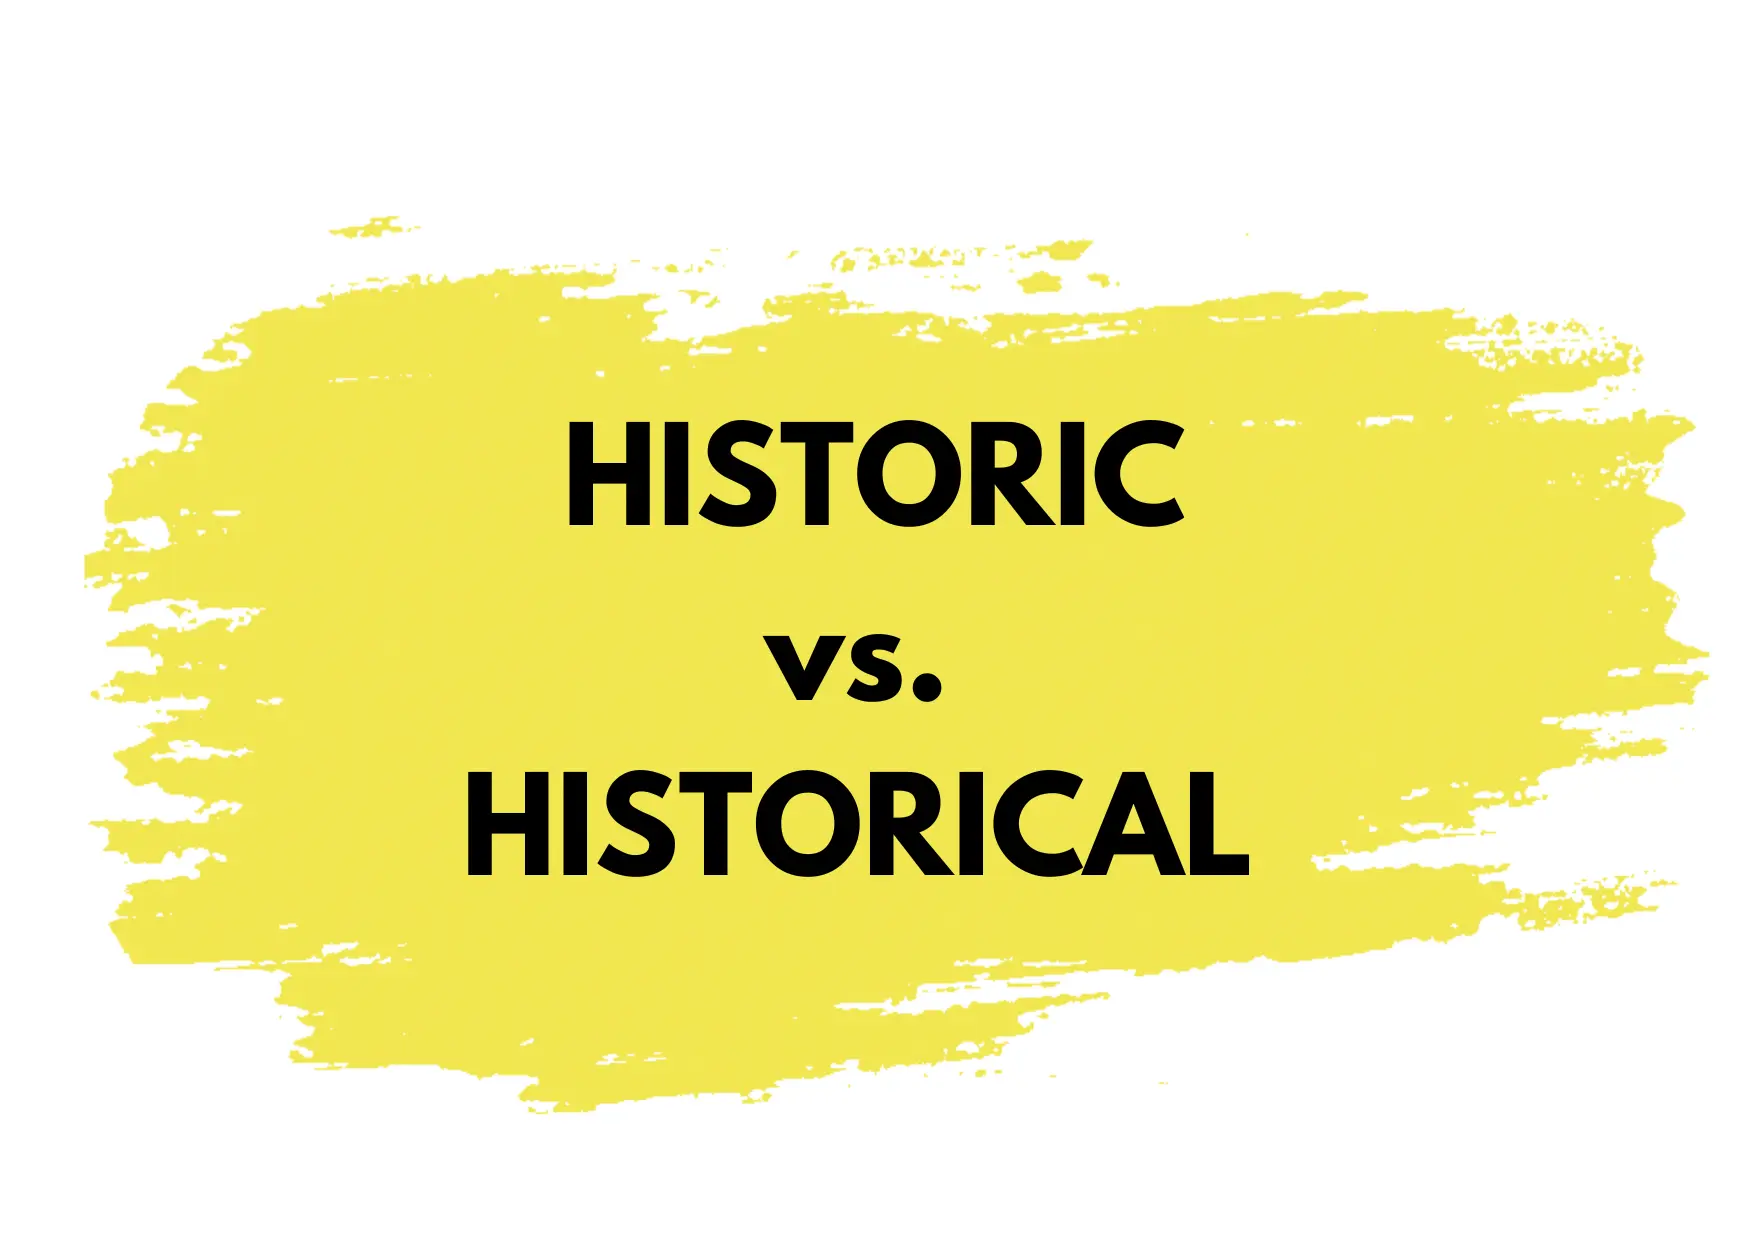 A yellow background with the words "Historic vs. Historical"